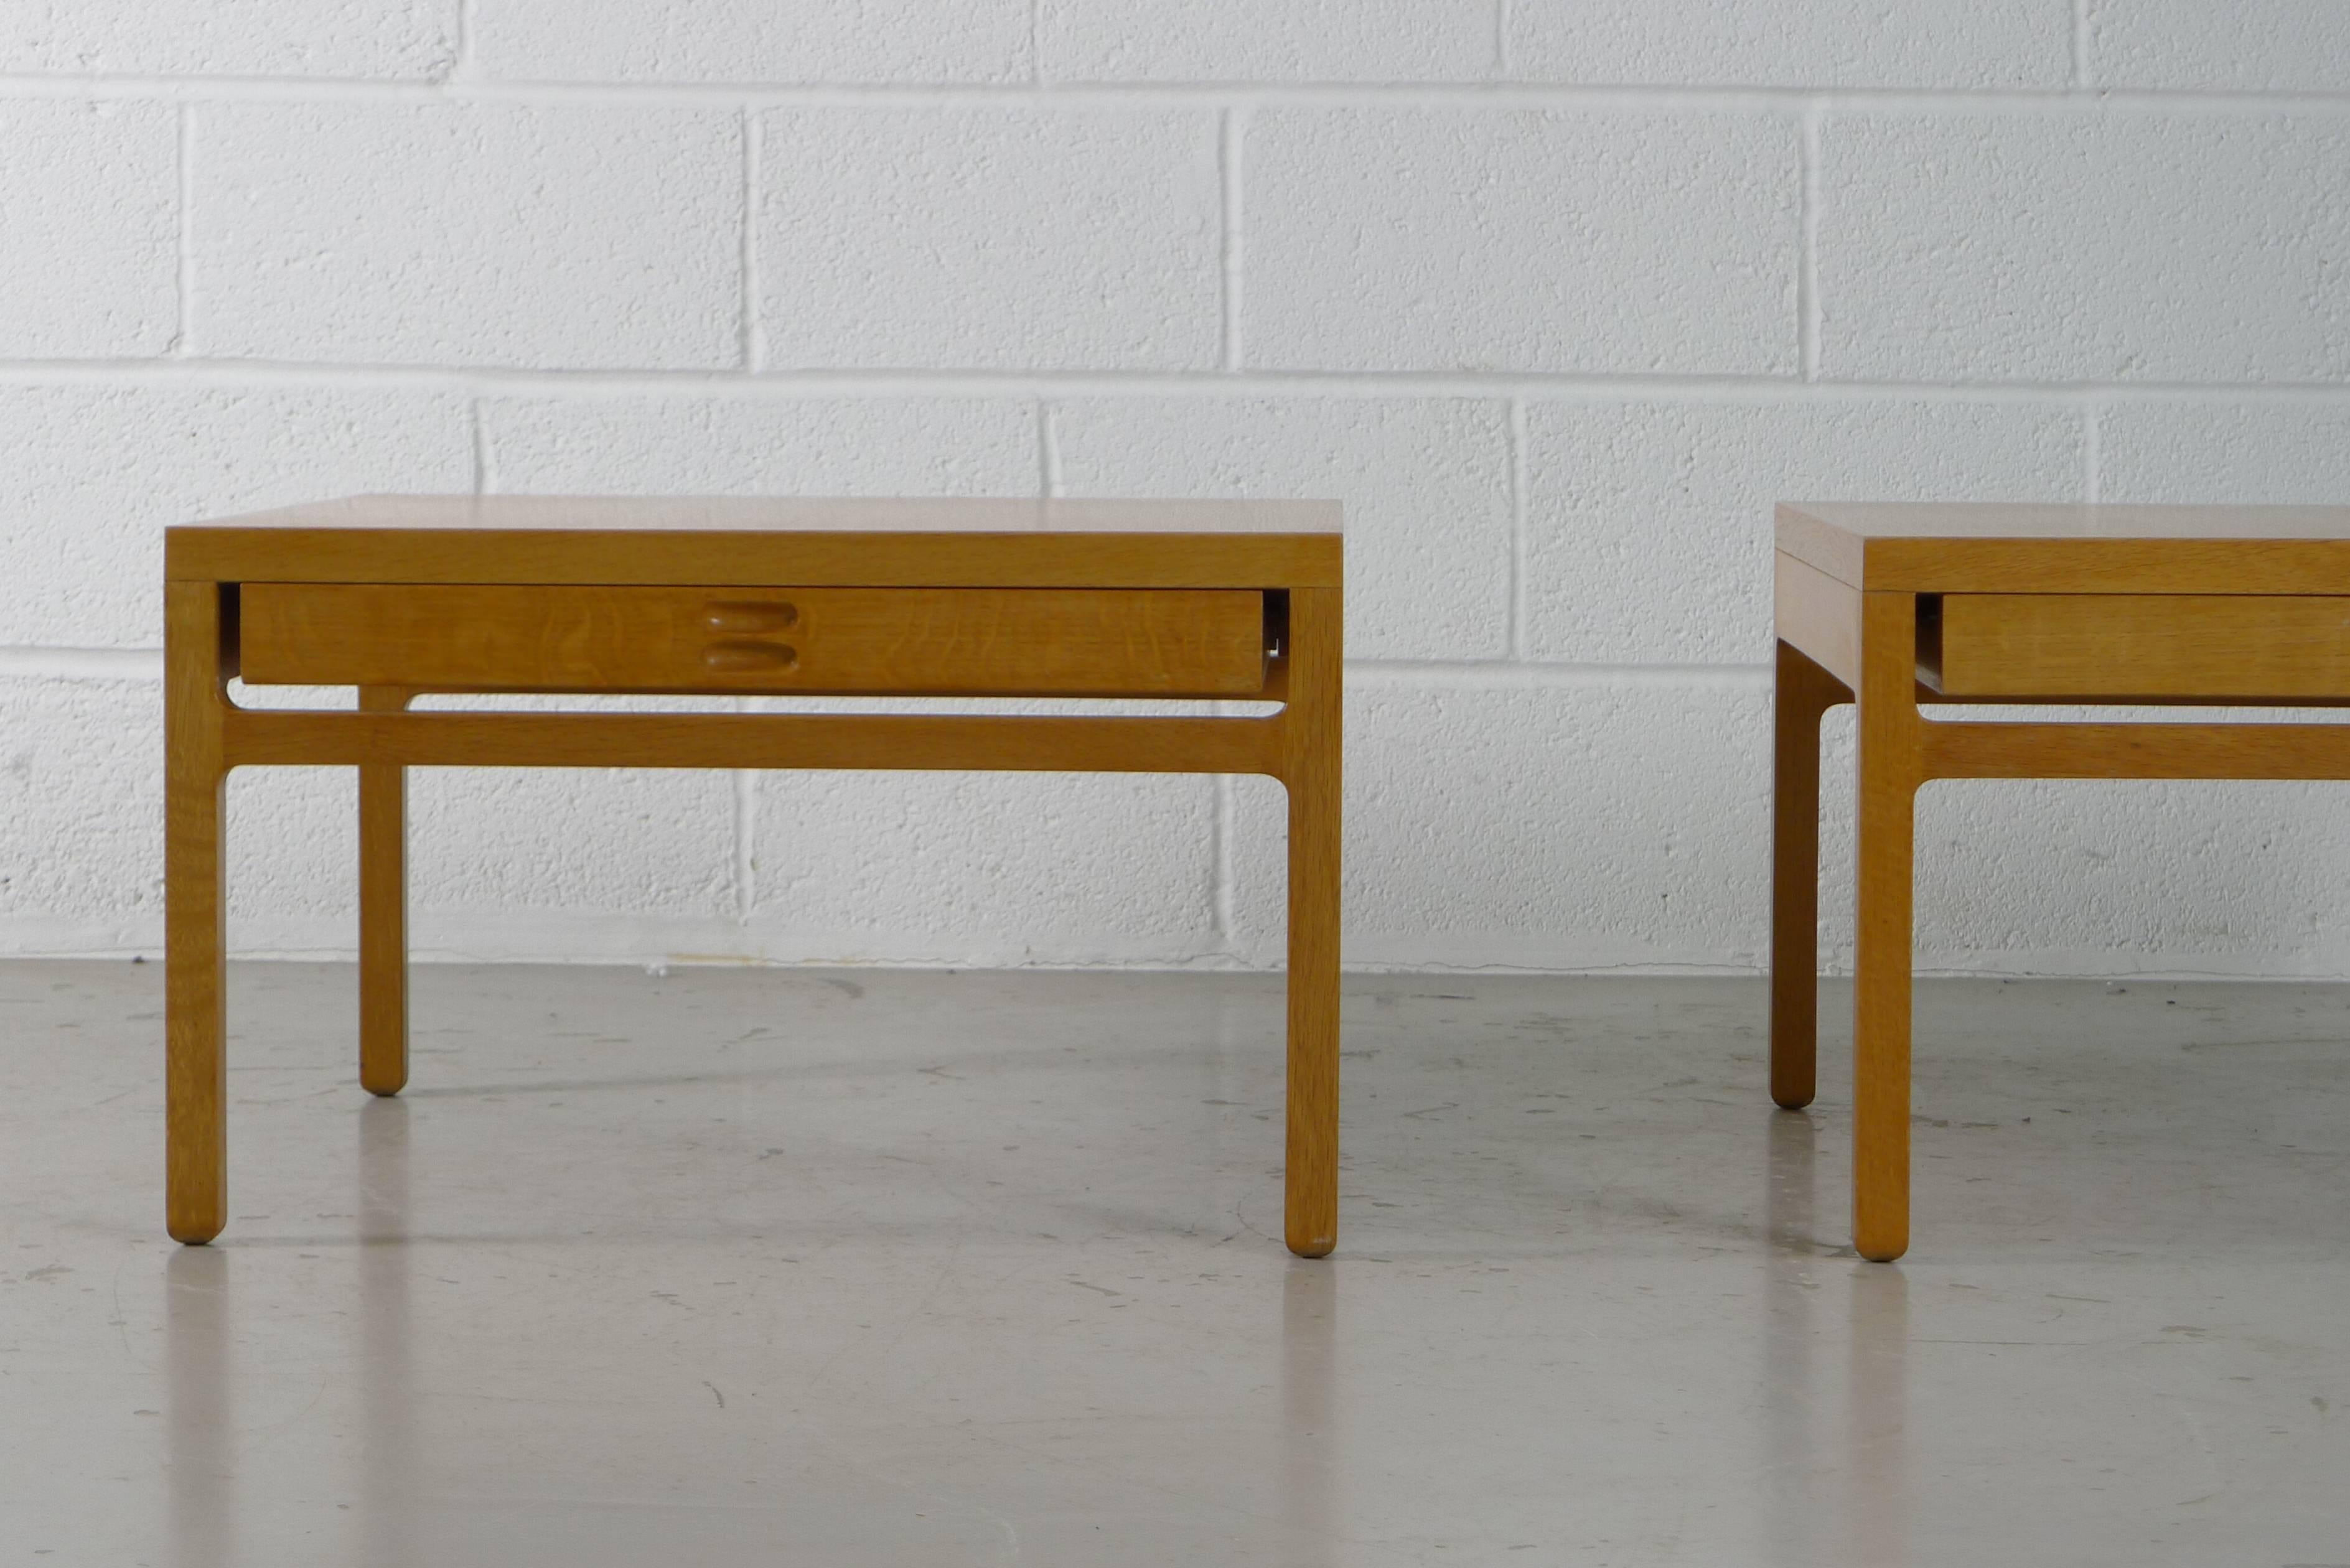 A pair of oak end tables by Ejner Larsen and Aksel bender Madesn for cabinetmaker Willy Beck, Denmark, 1960s. 

A single drawer that can be pulled from either side of the unit, nicely profiled and in perfect condition.